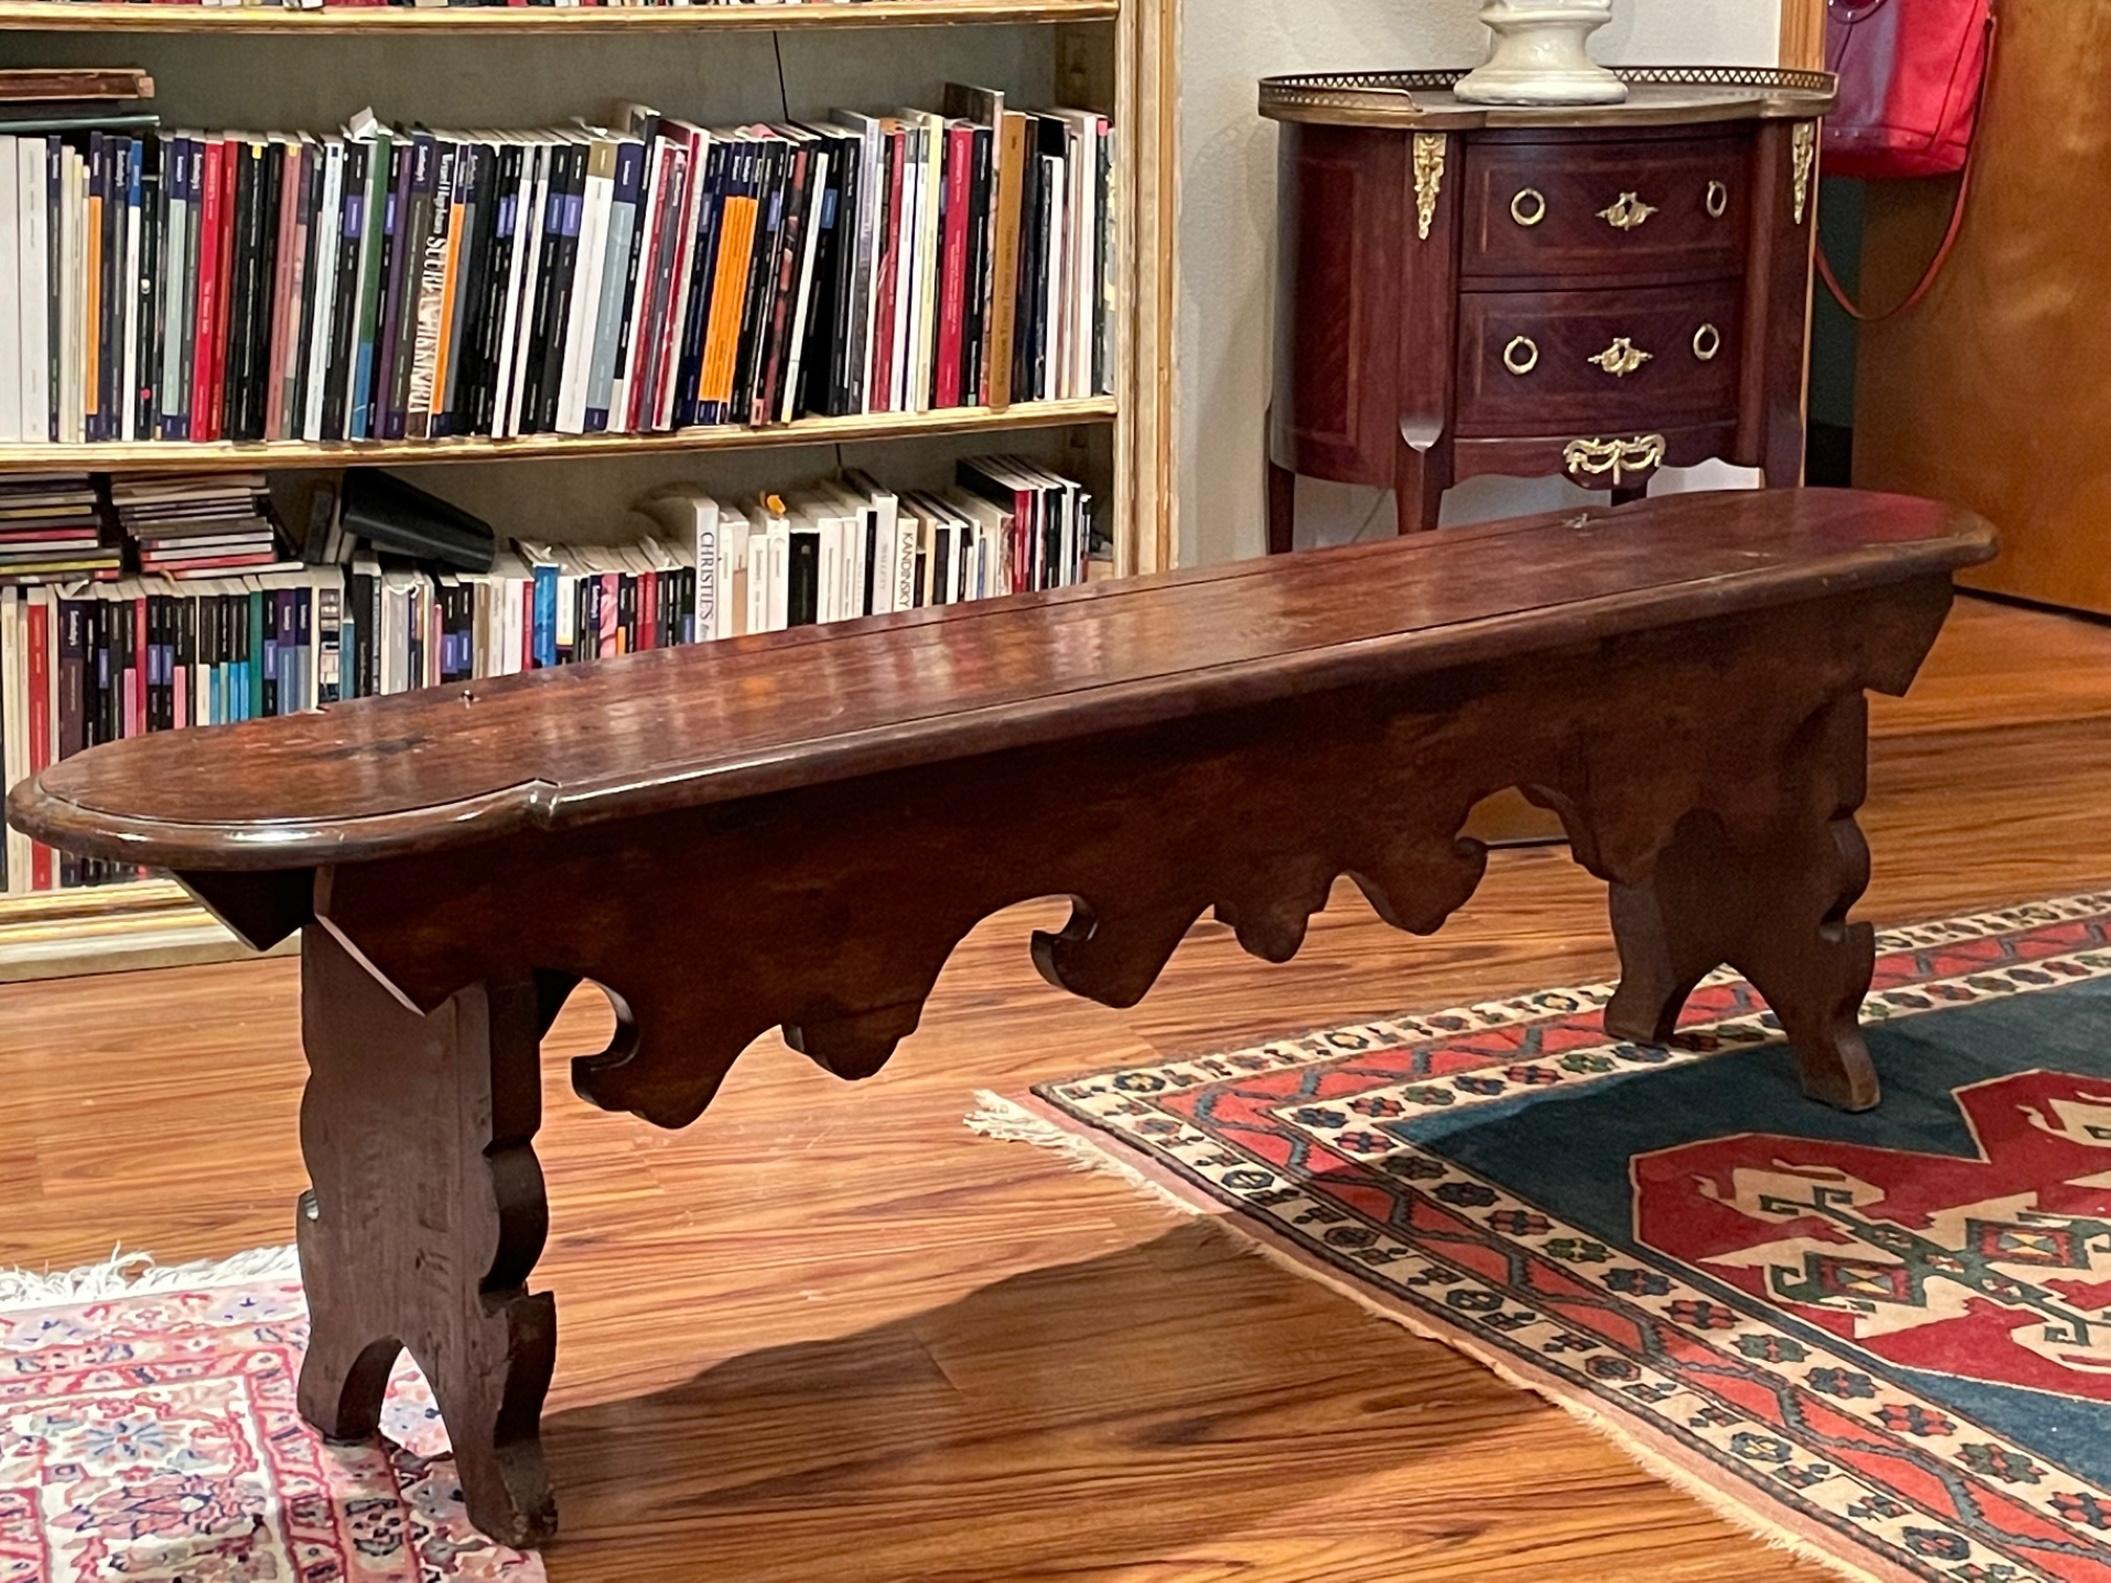 17th century English oak lift up top long trestle bench, circa 1700

This magnificent and impressive English trestle bench, made from heavy oak, stretches approximately 5 ½ feet long. The lift up top, with hand forged hinges, is made from two